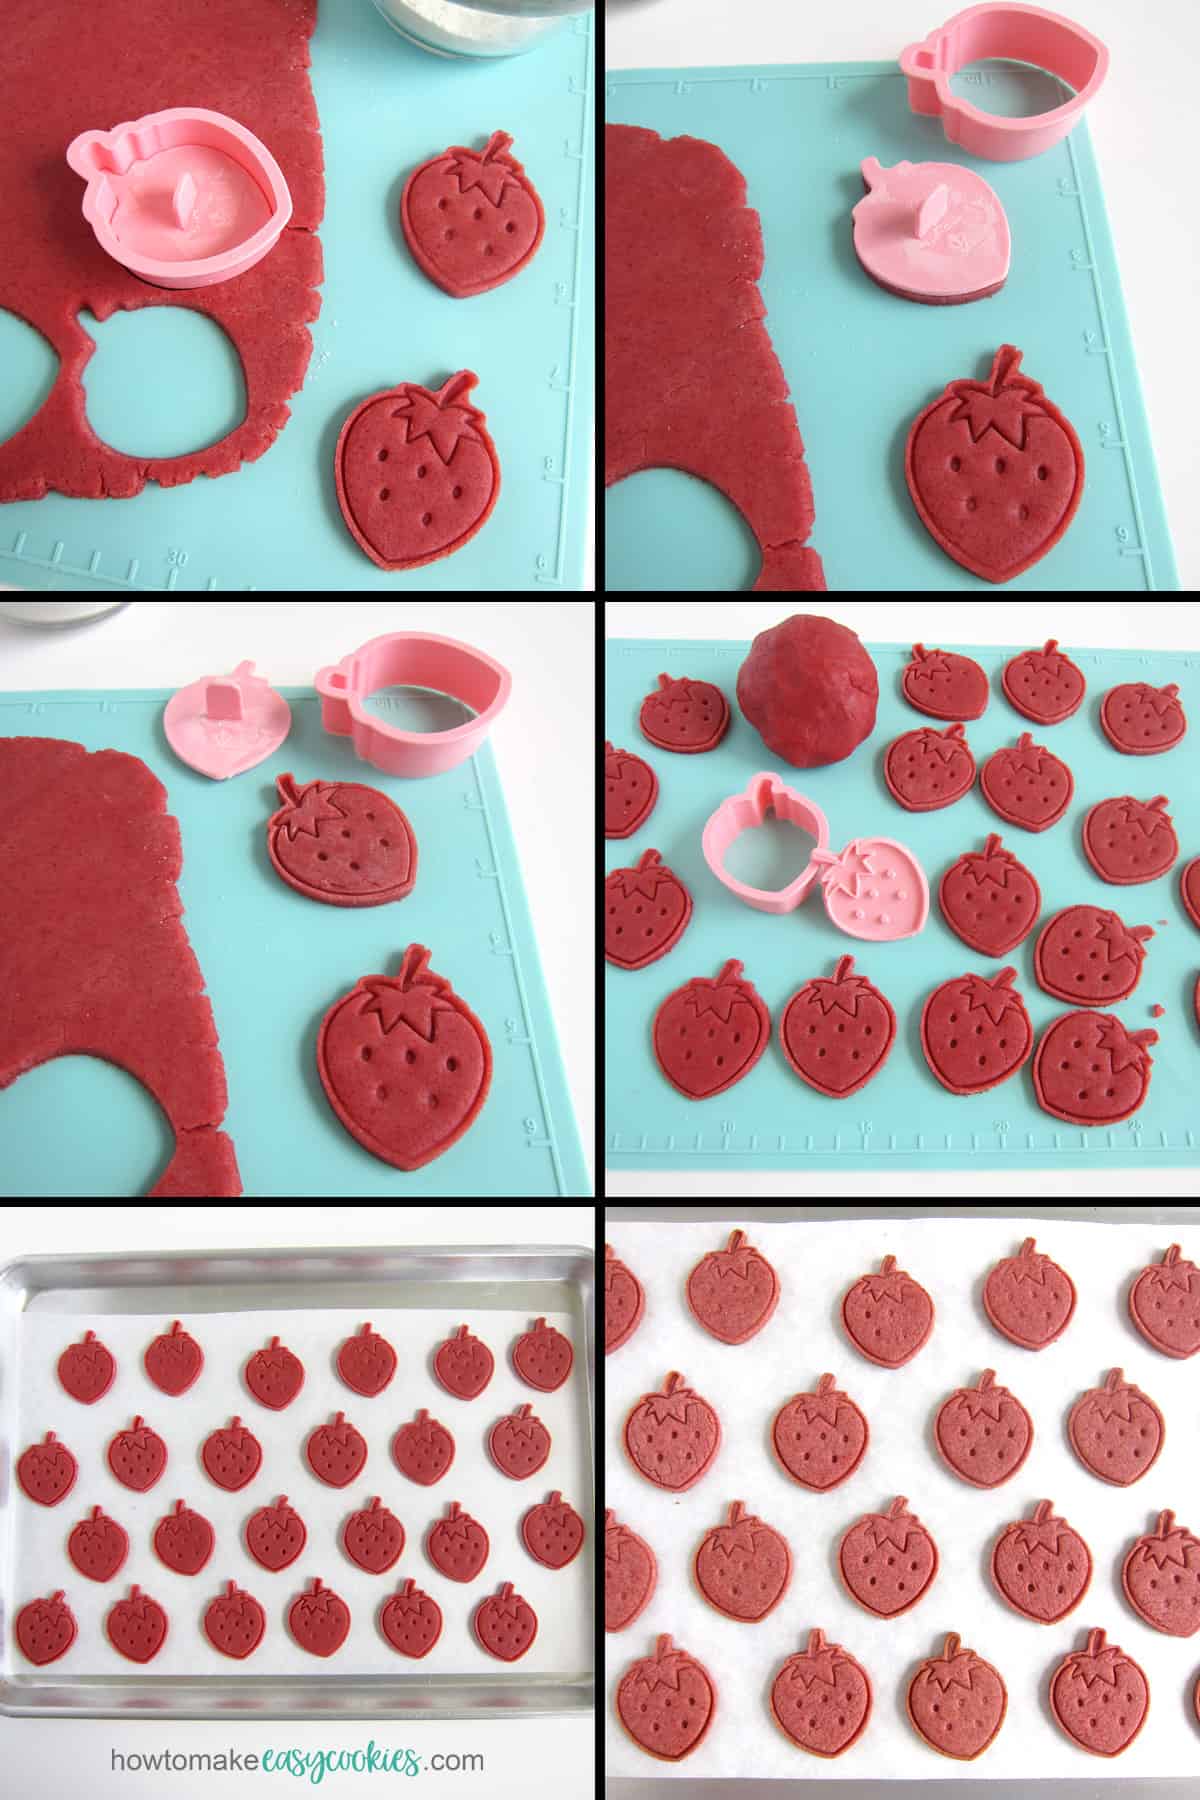 cut out strawberry cookie dough using a strawberry cookie cutter and stamp then bake